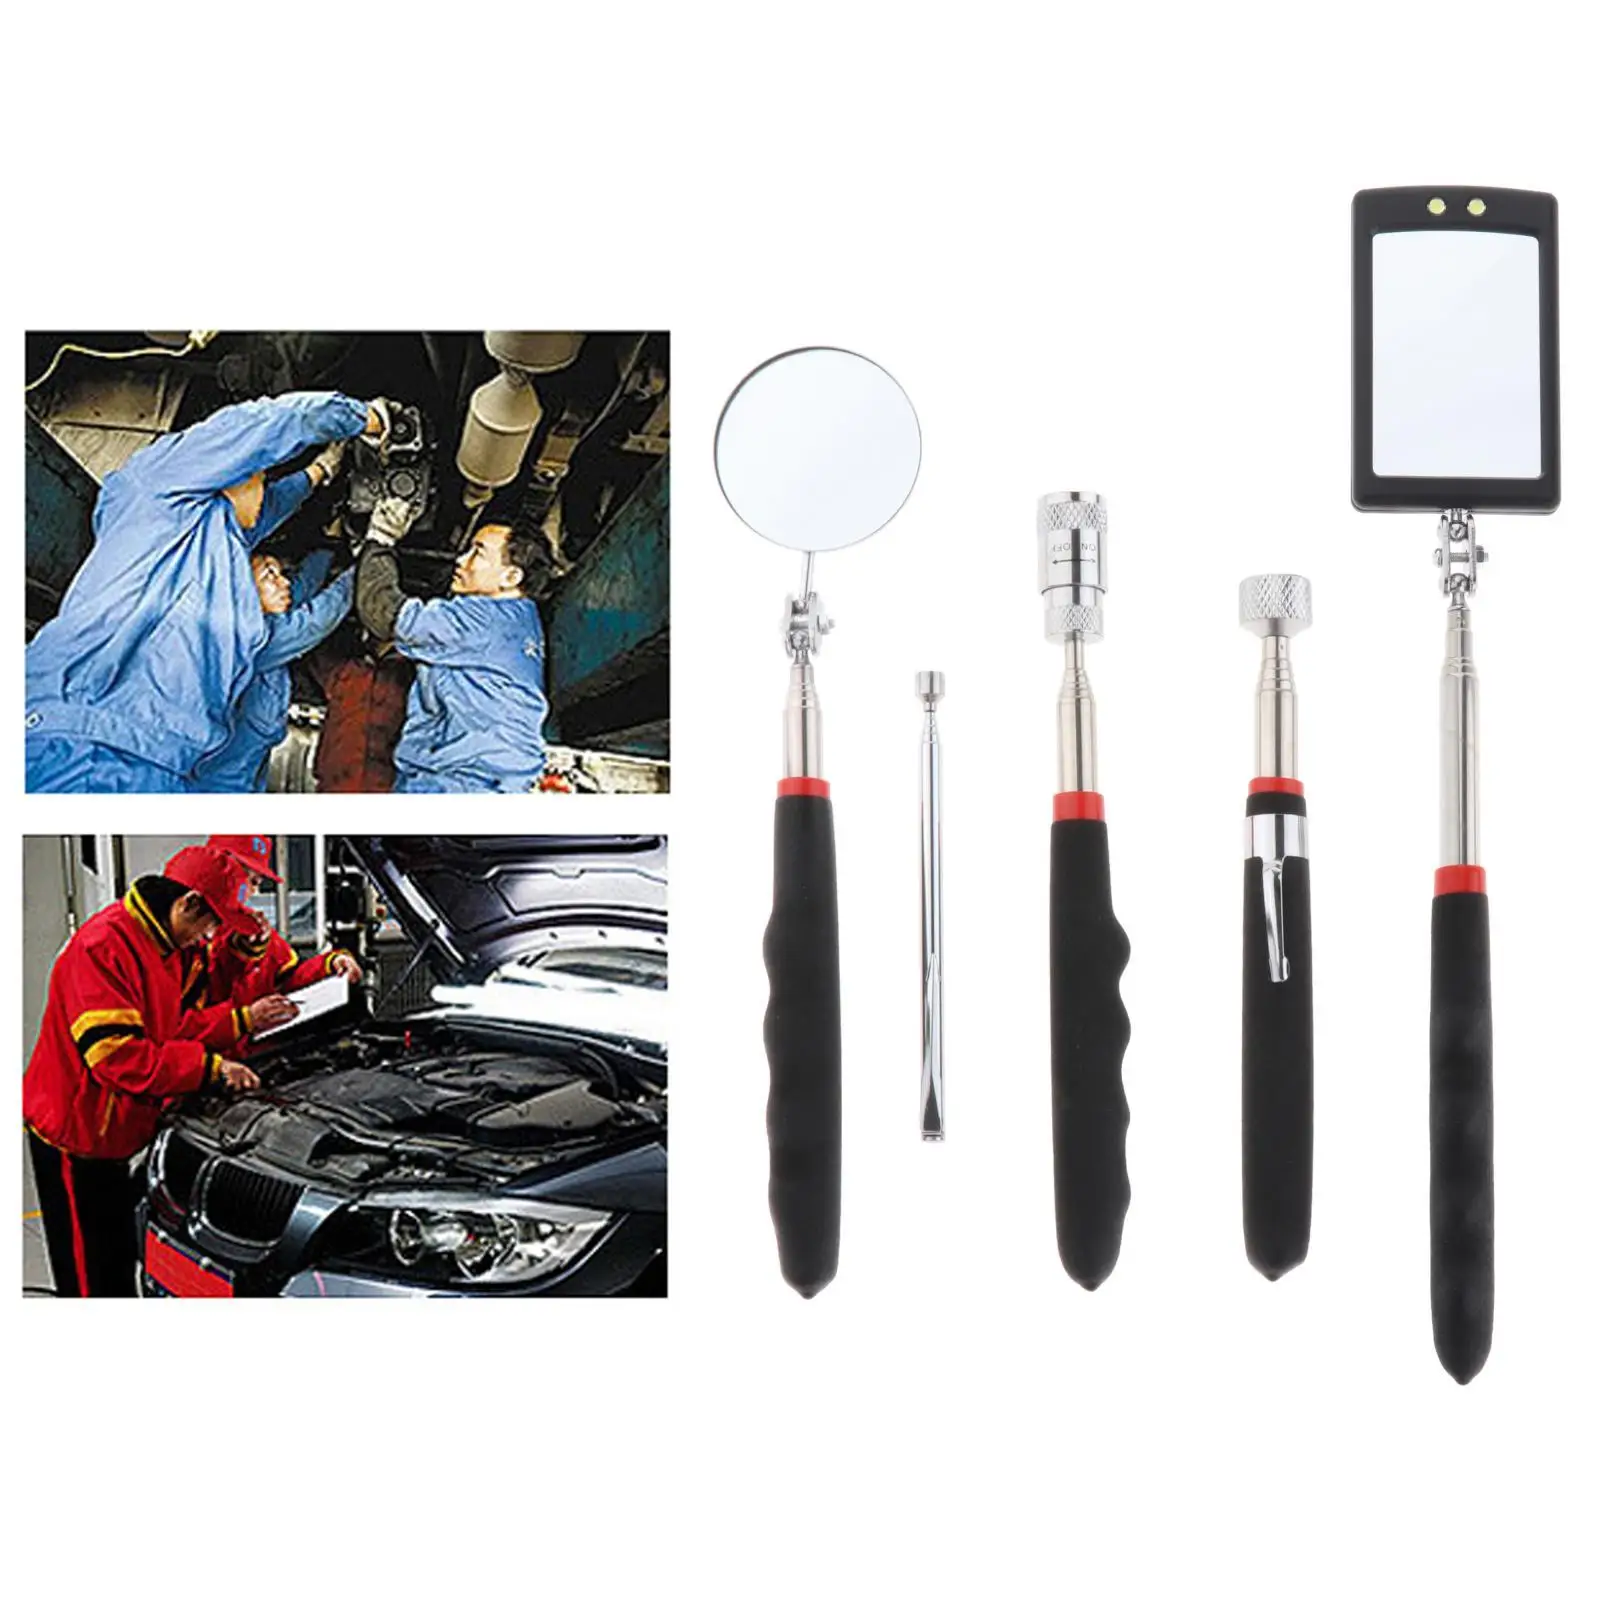  Telescoping Pickup Tool Set Telescoping Handle 360 Swivel Adjustable Mirror with Handle Retractable Fit for Car Maintenance